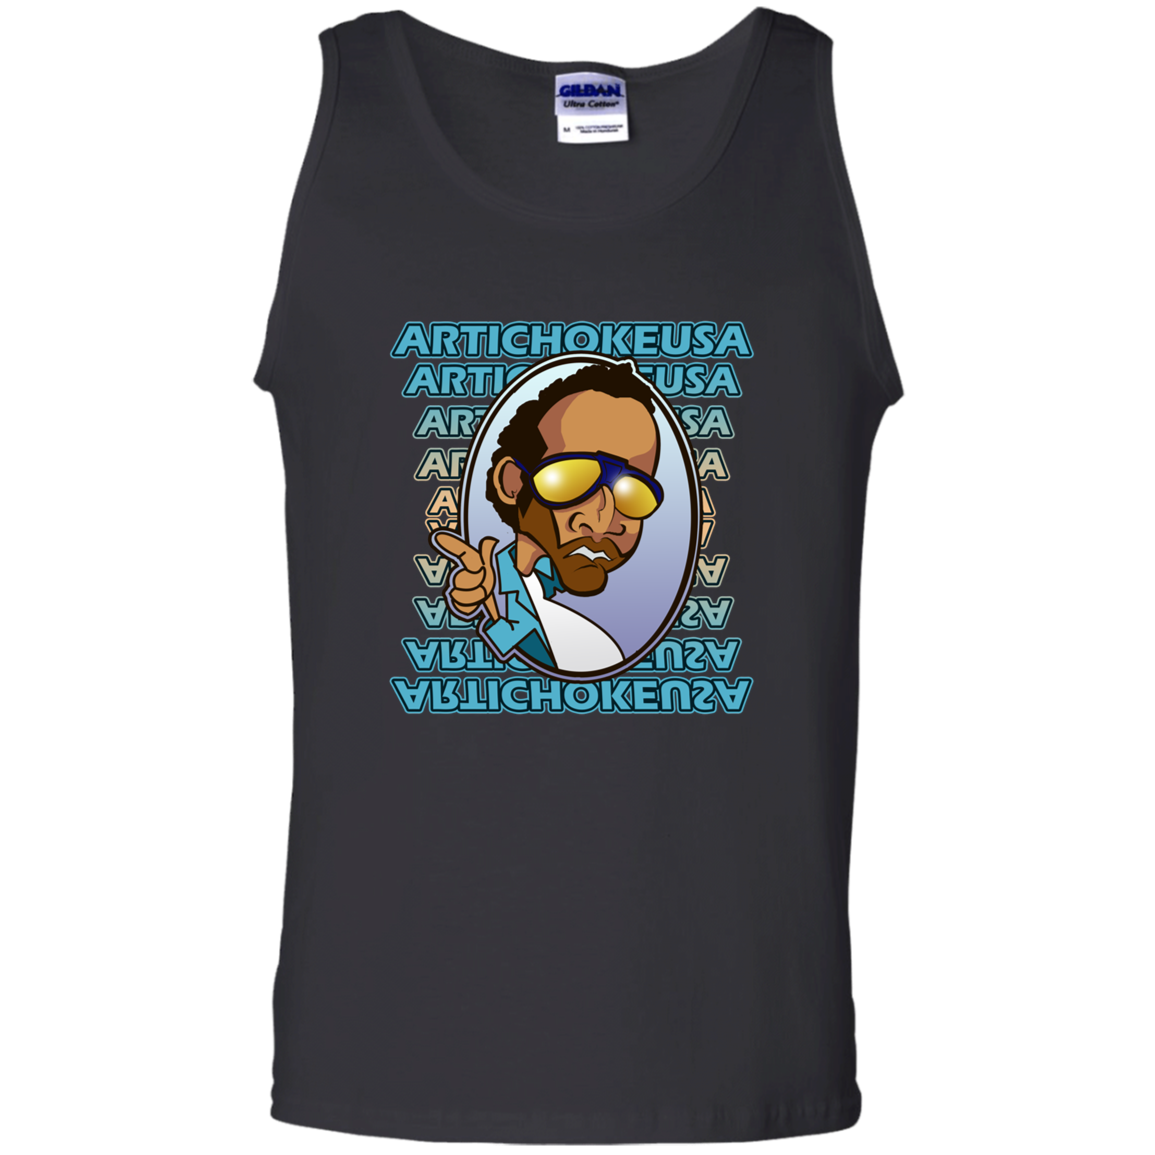 ArtichokeUSA Character and Font design. Let's Create Your Own Team Design Today. My first client Charles. Men's 100% Cotton Tank Top